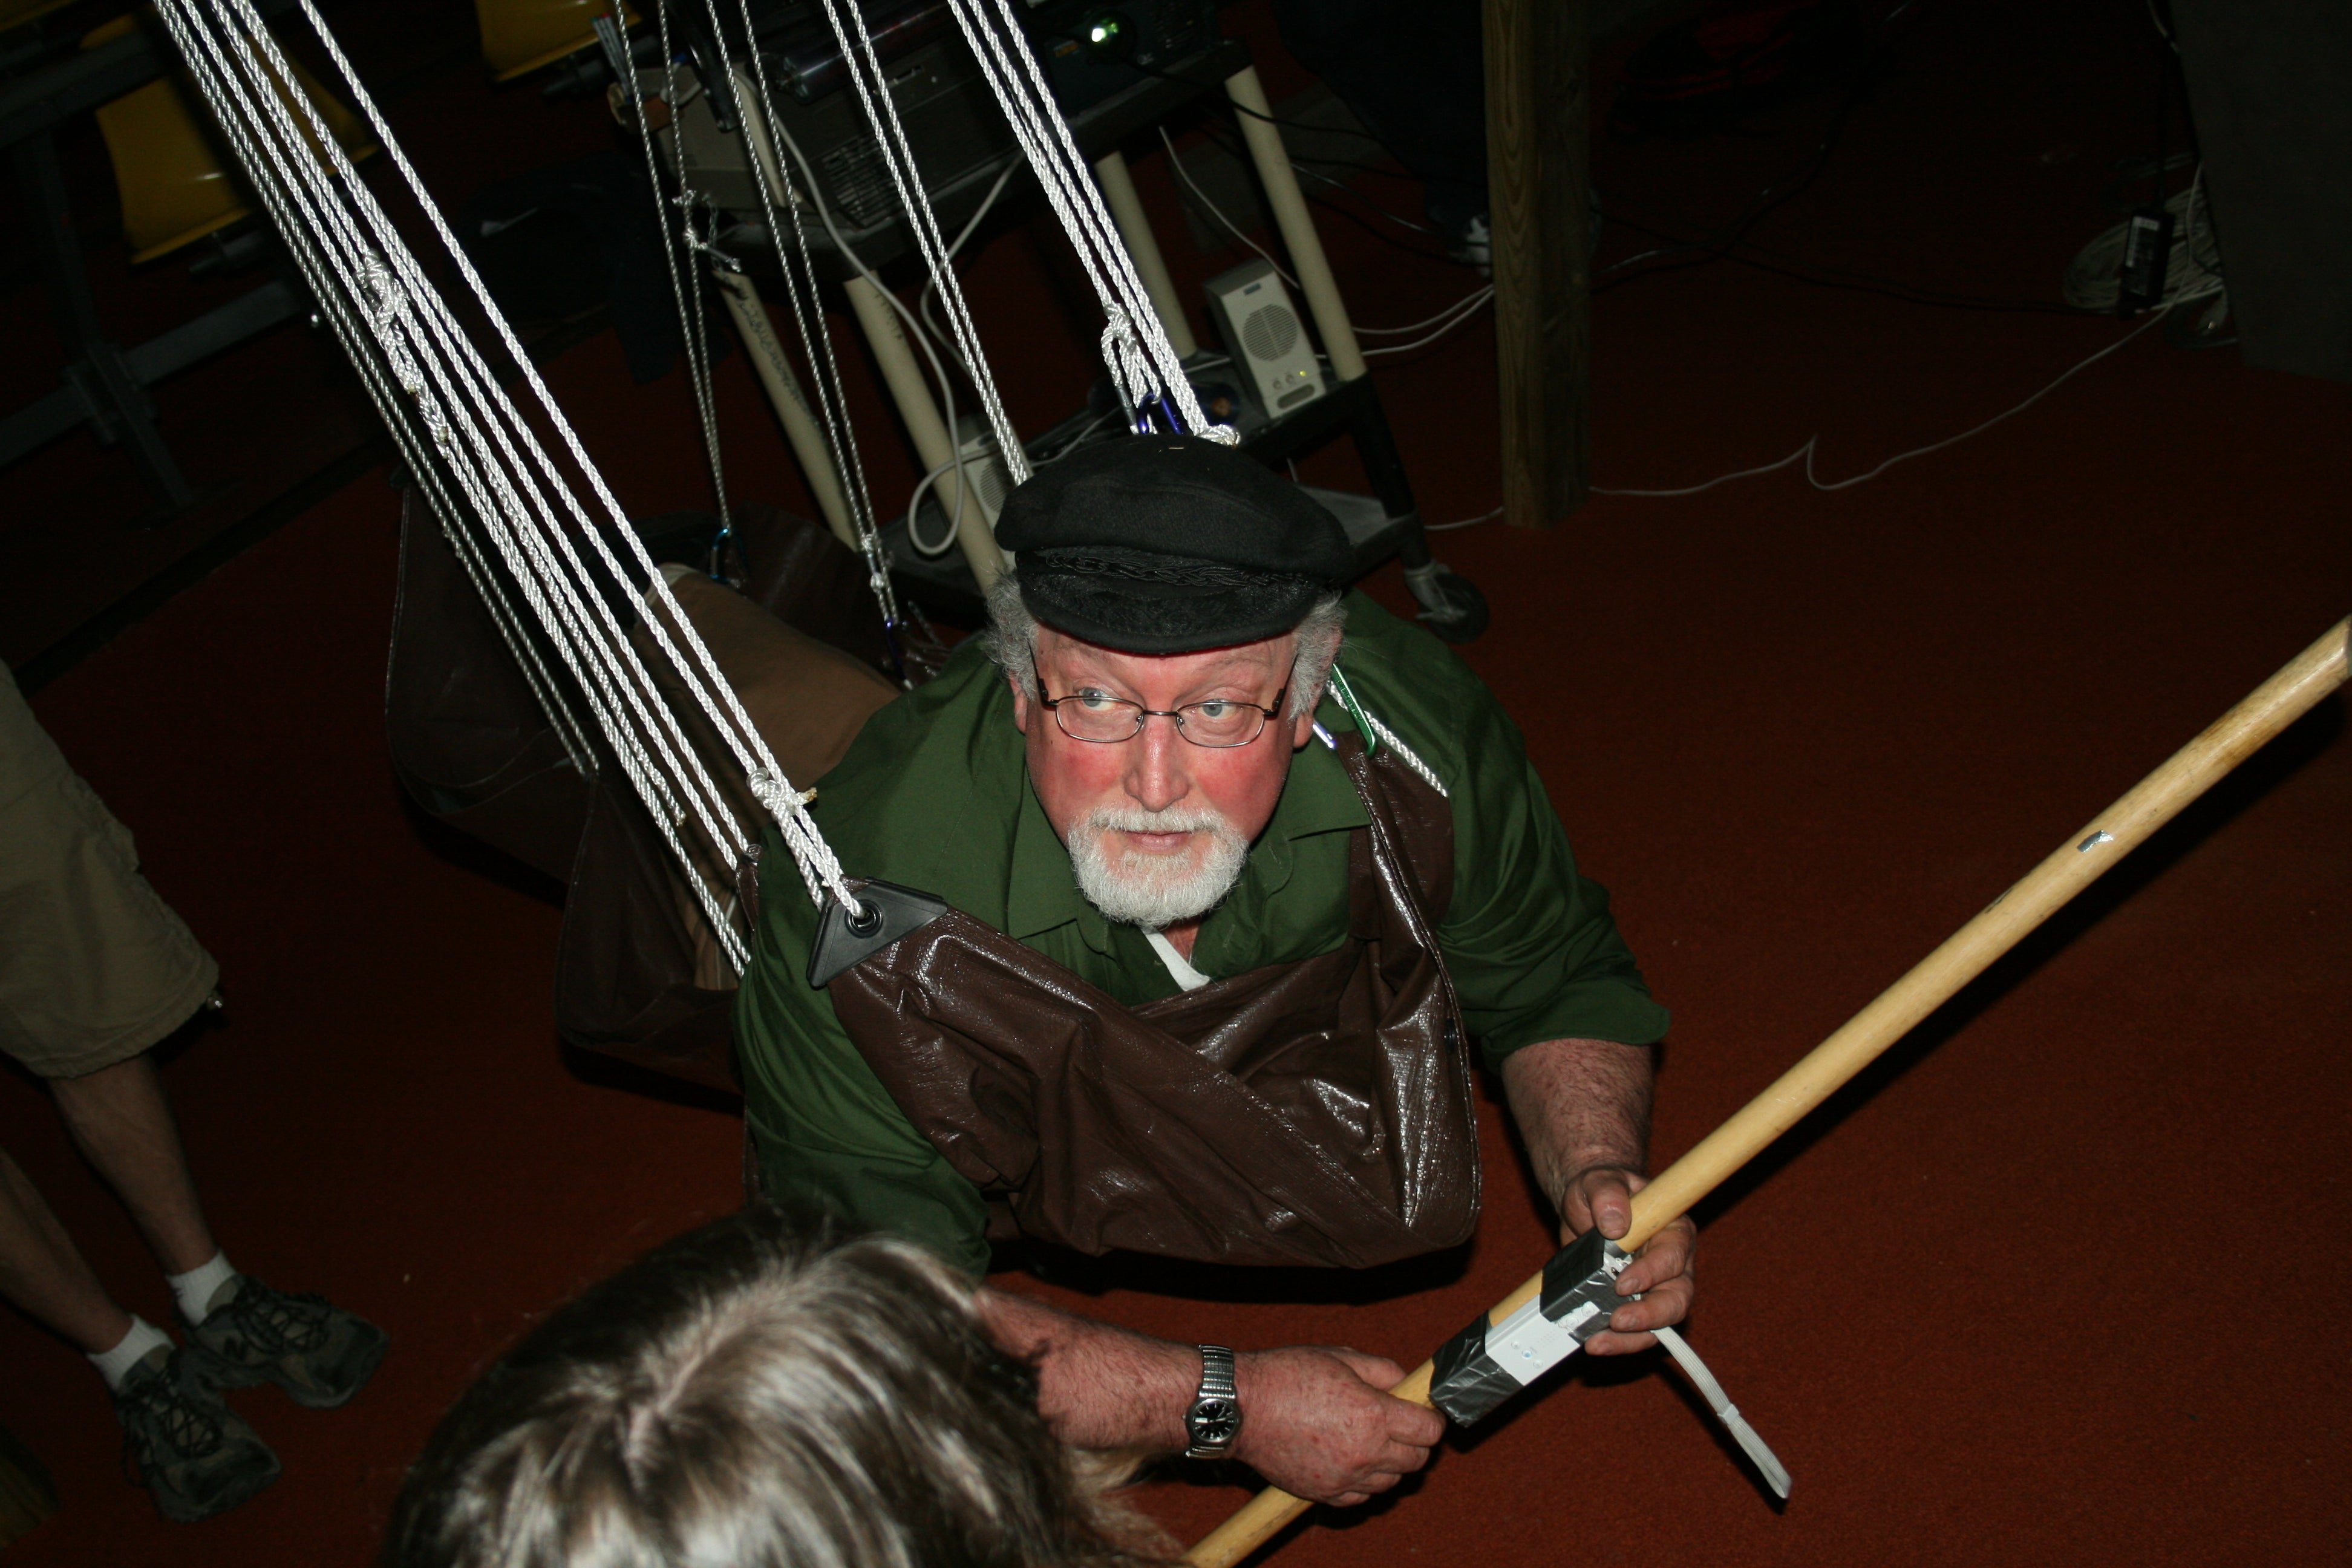 Ralph Noble suspended from a wooden frame at GameFest 2008.